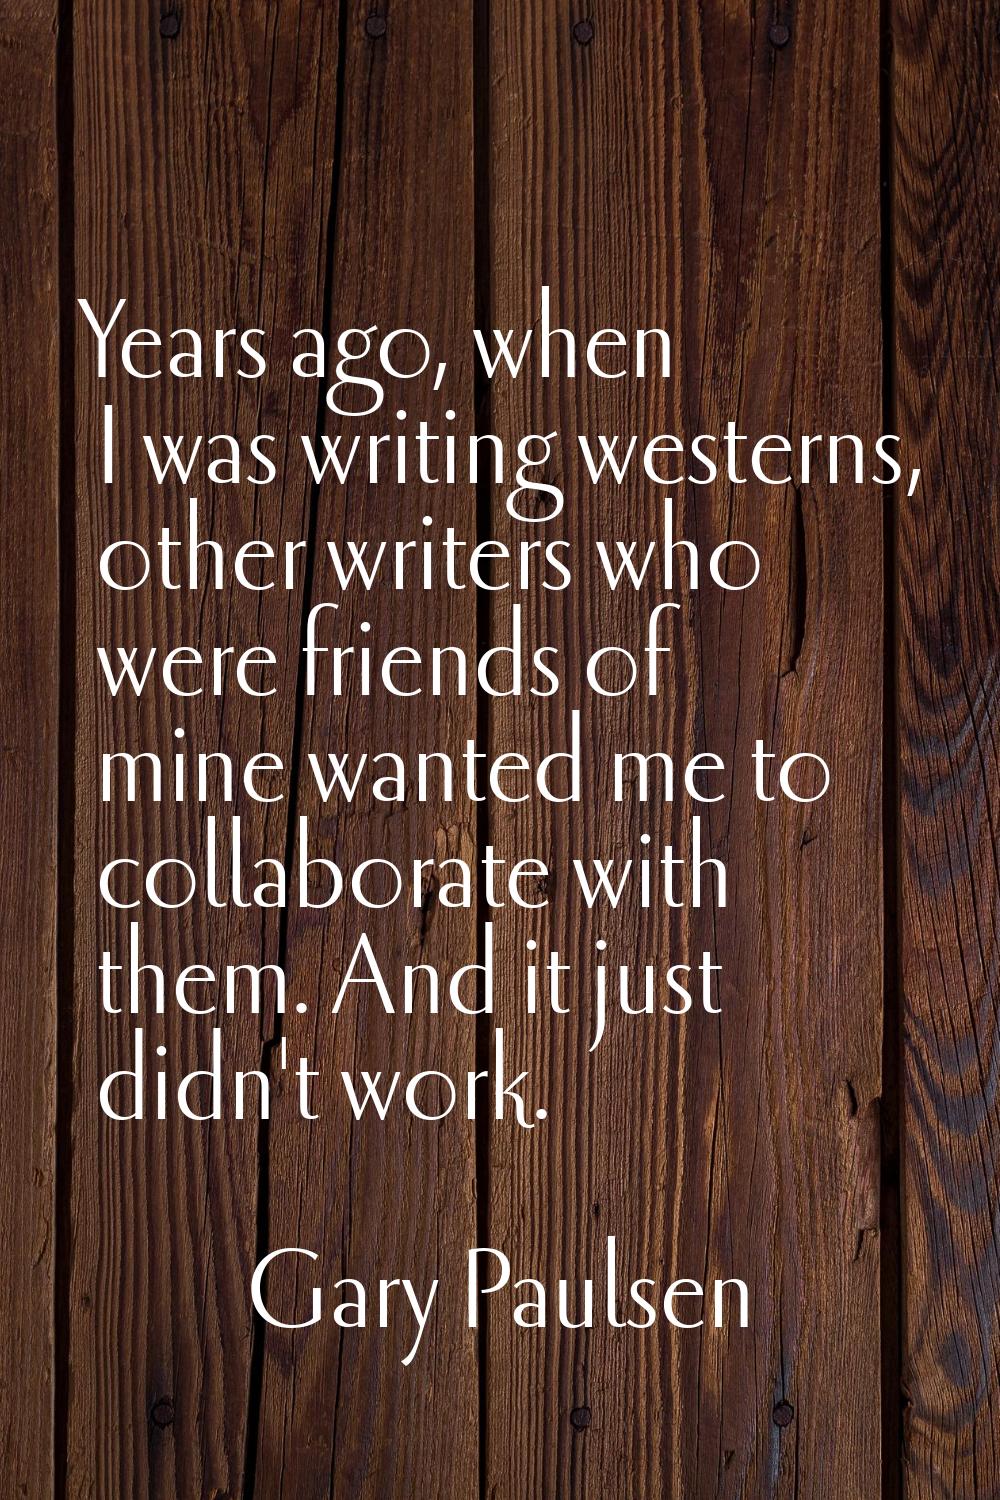 Years ago, when I was writing westerns, other writers who were friends of mine wanted me to collabo